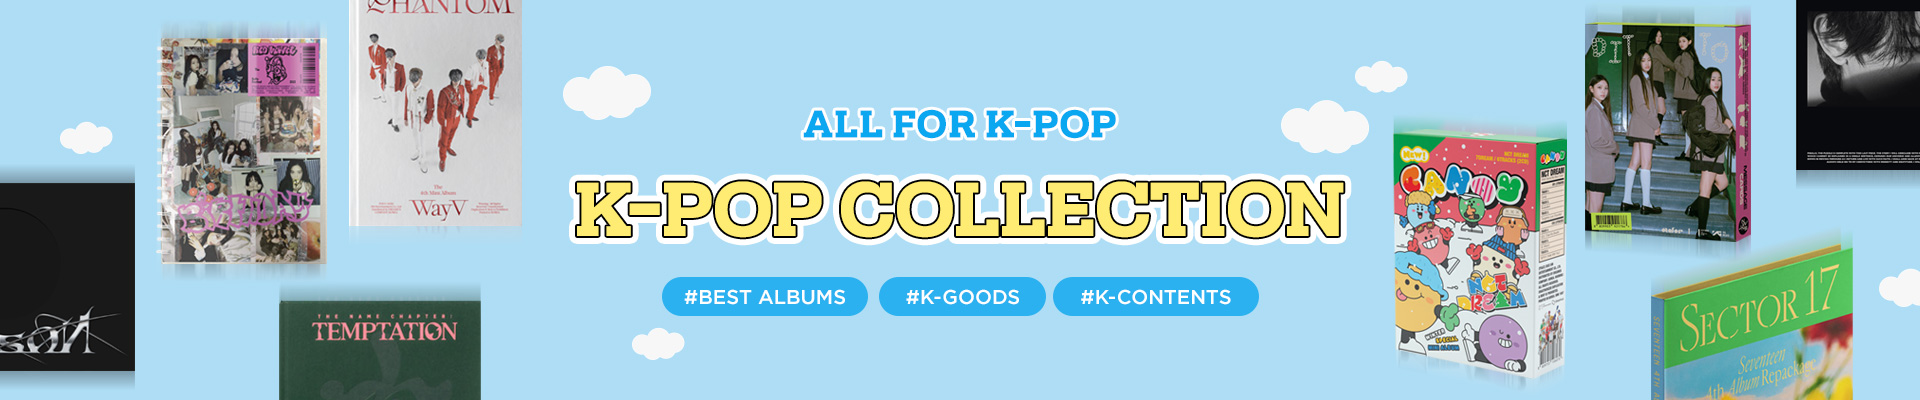 Kpop Collection